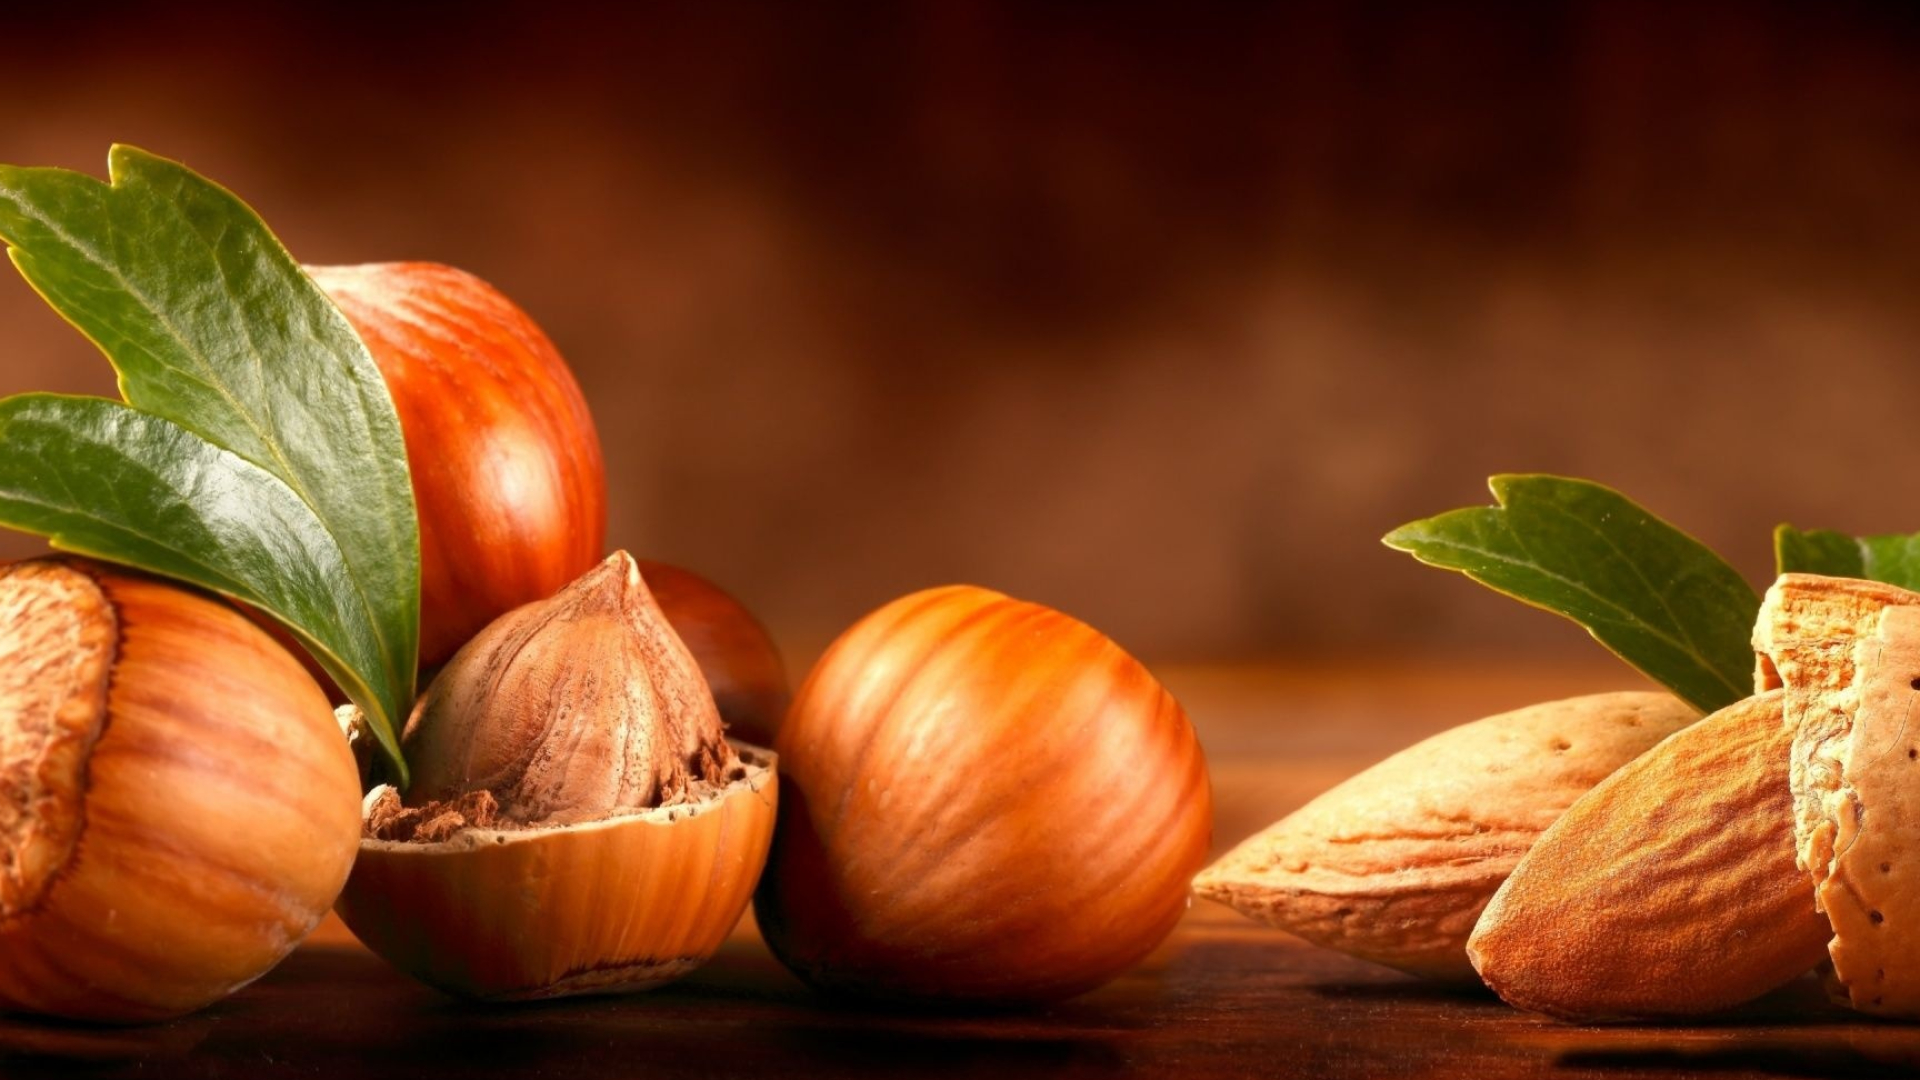 Hazelnuts: A perennial plant that is able to bear fruit even after the age of 50 years. 1920x1080 Full HD Background.